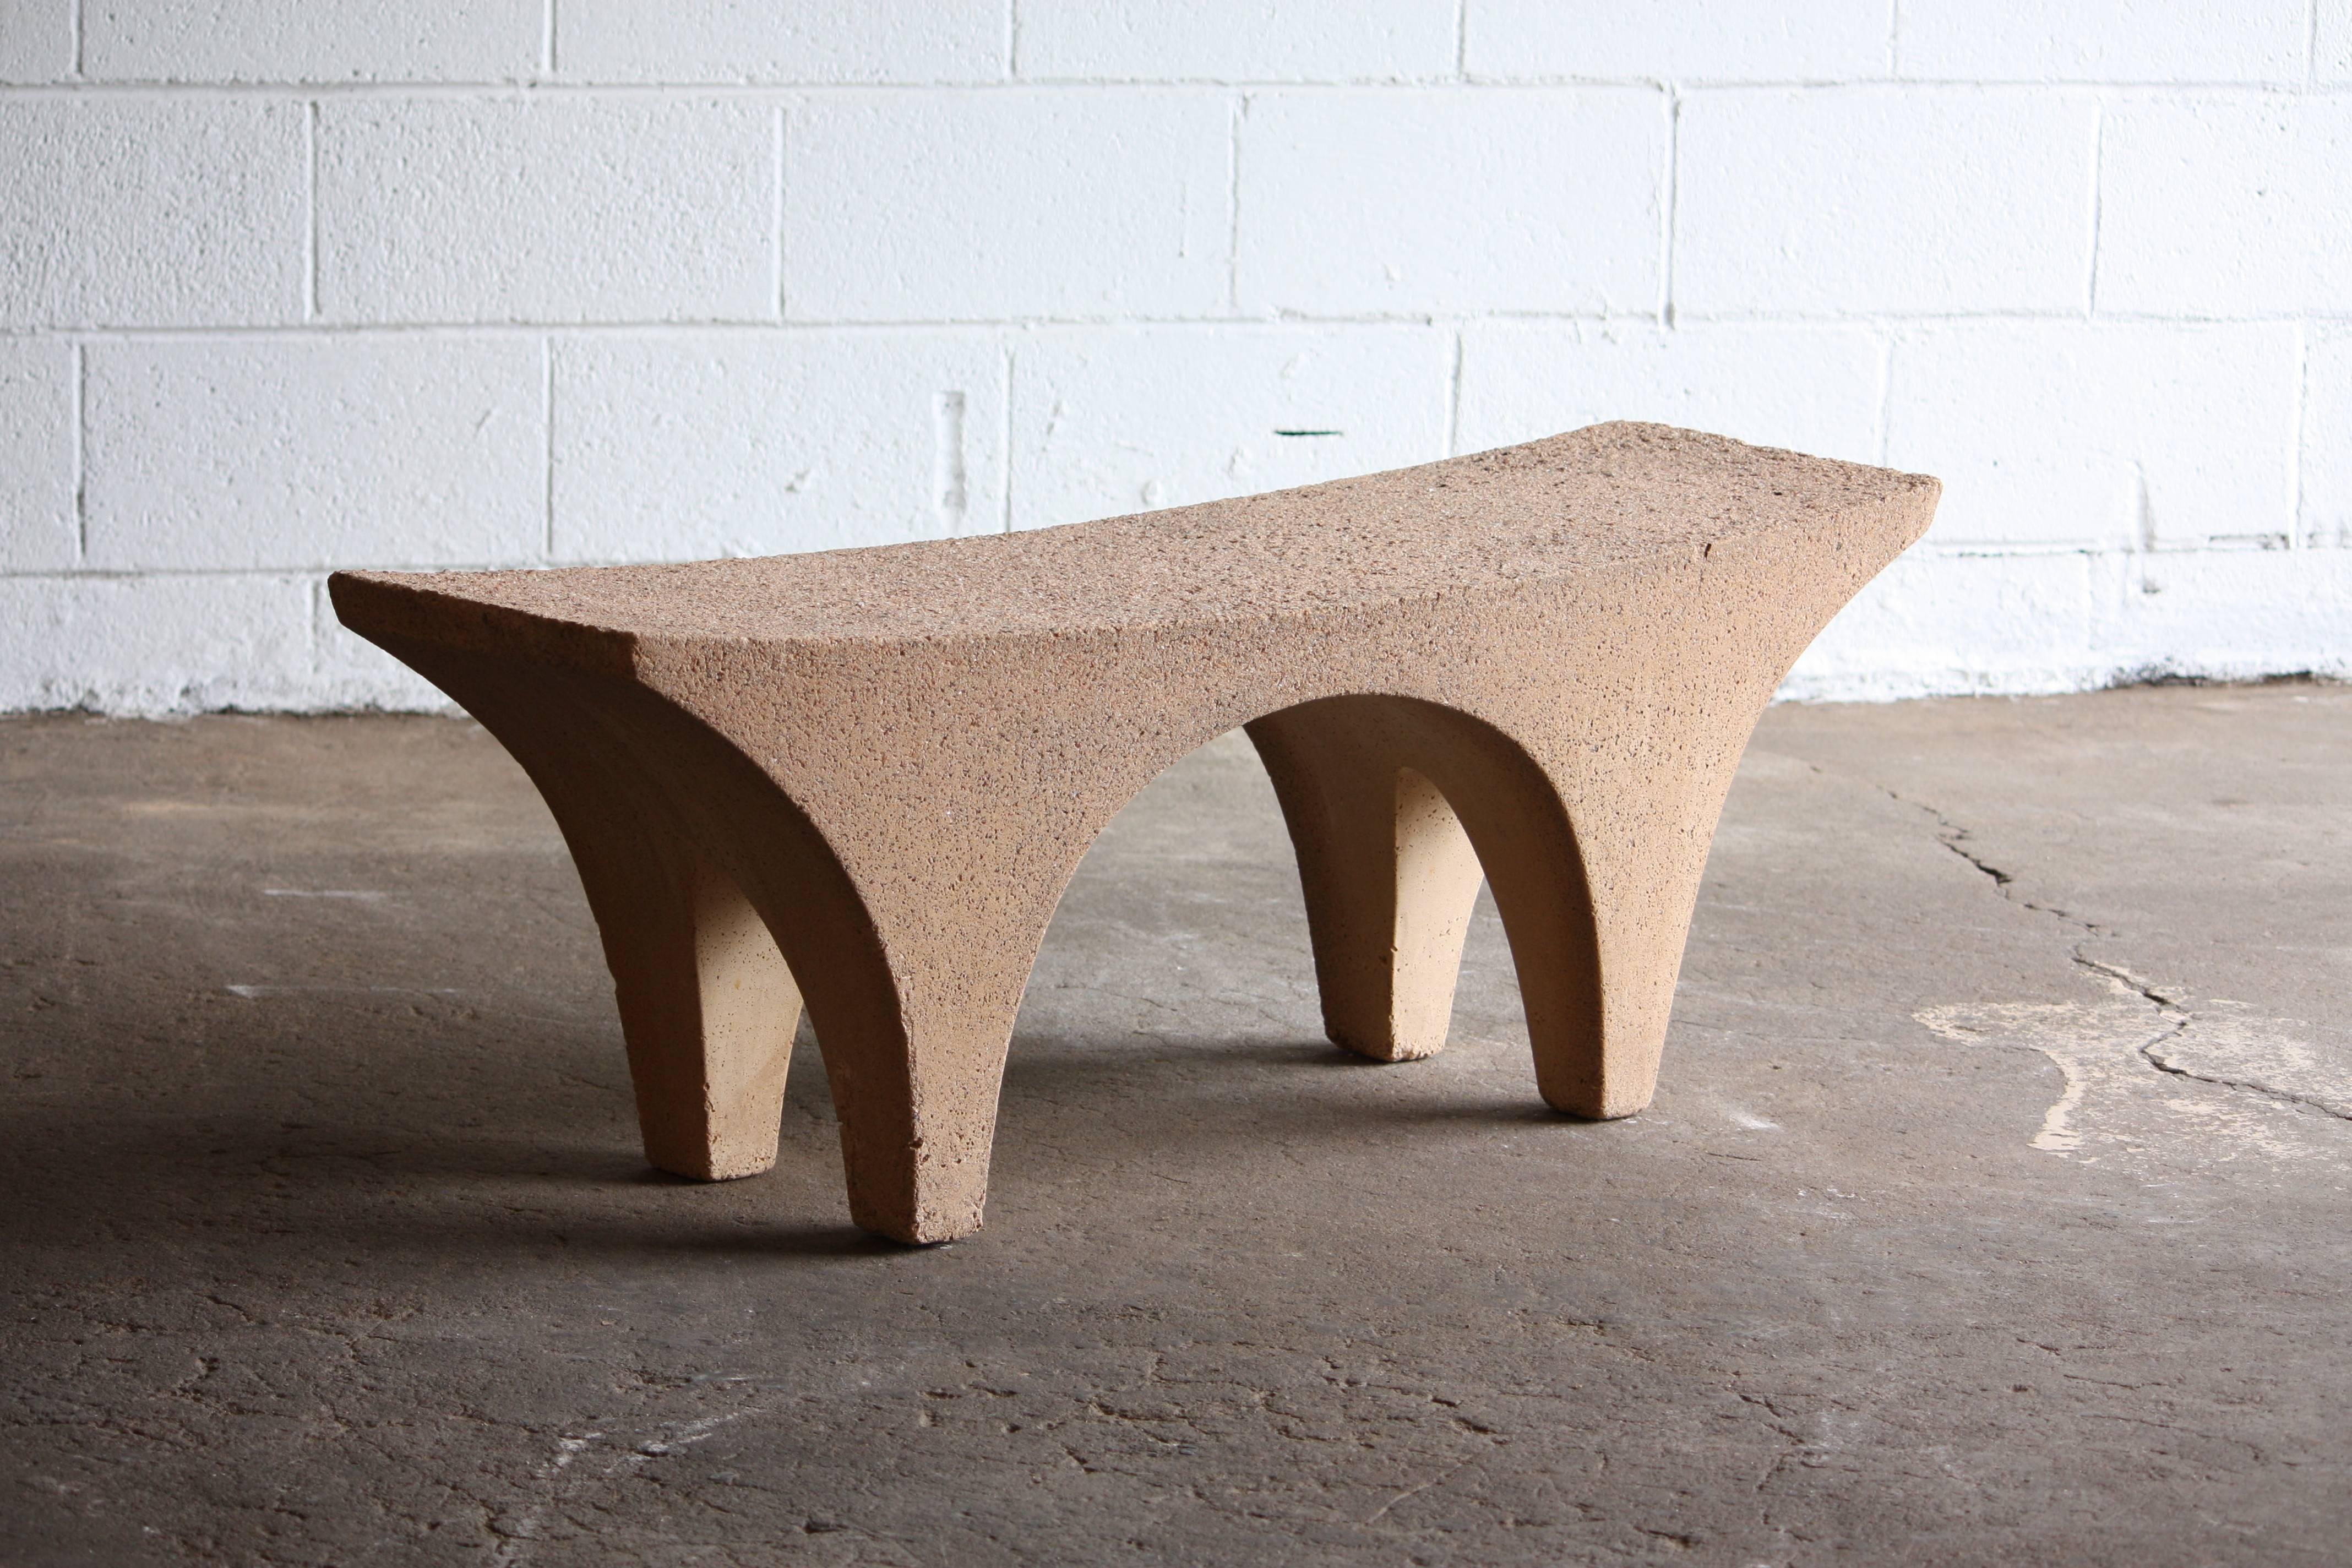 Wonderful concrete bench for indoor or outdoor use. This bench says a lot with its curves and textures.